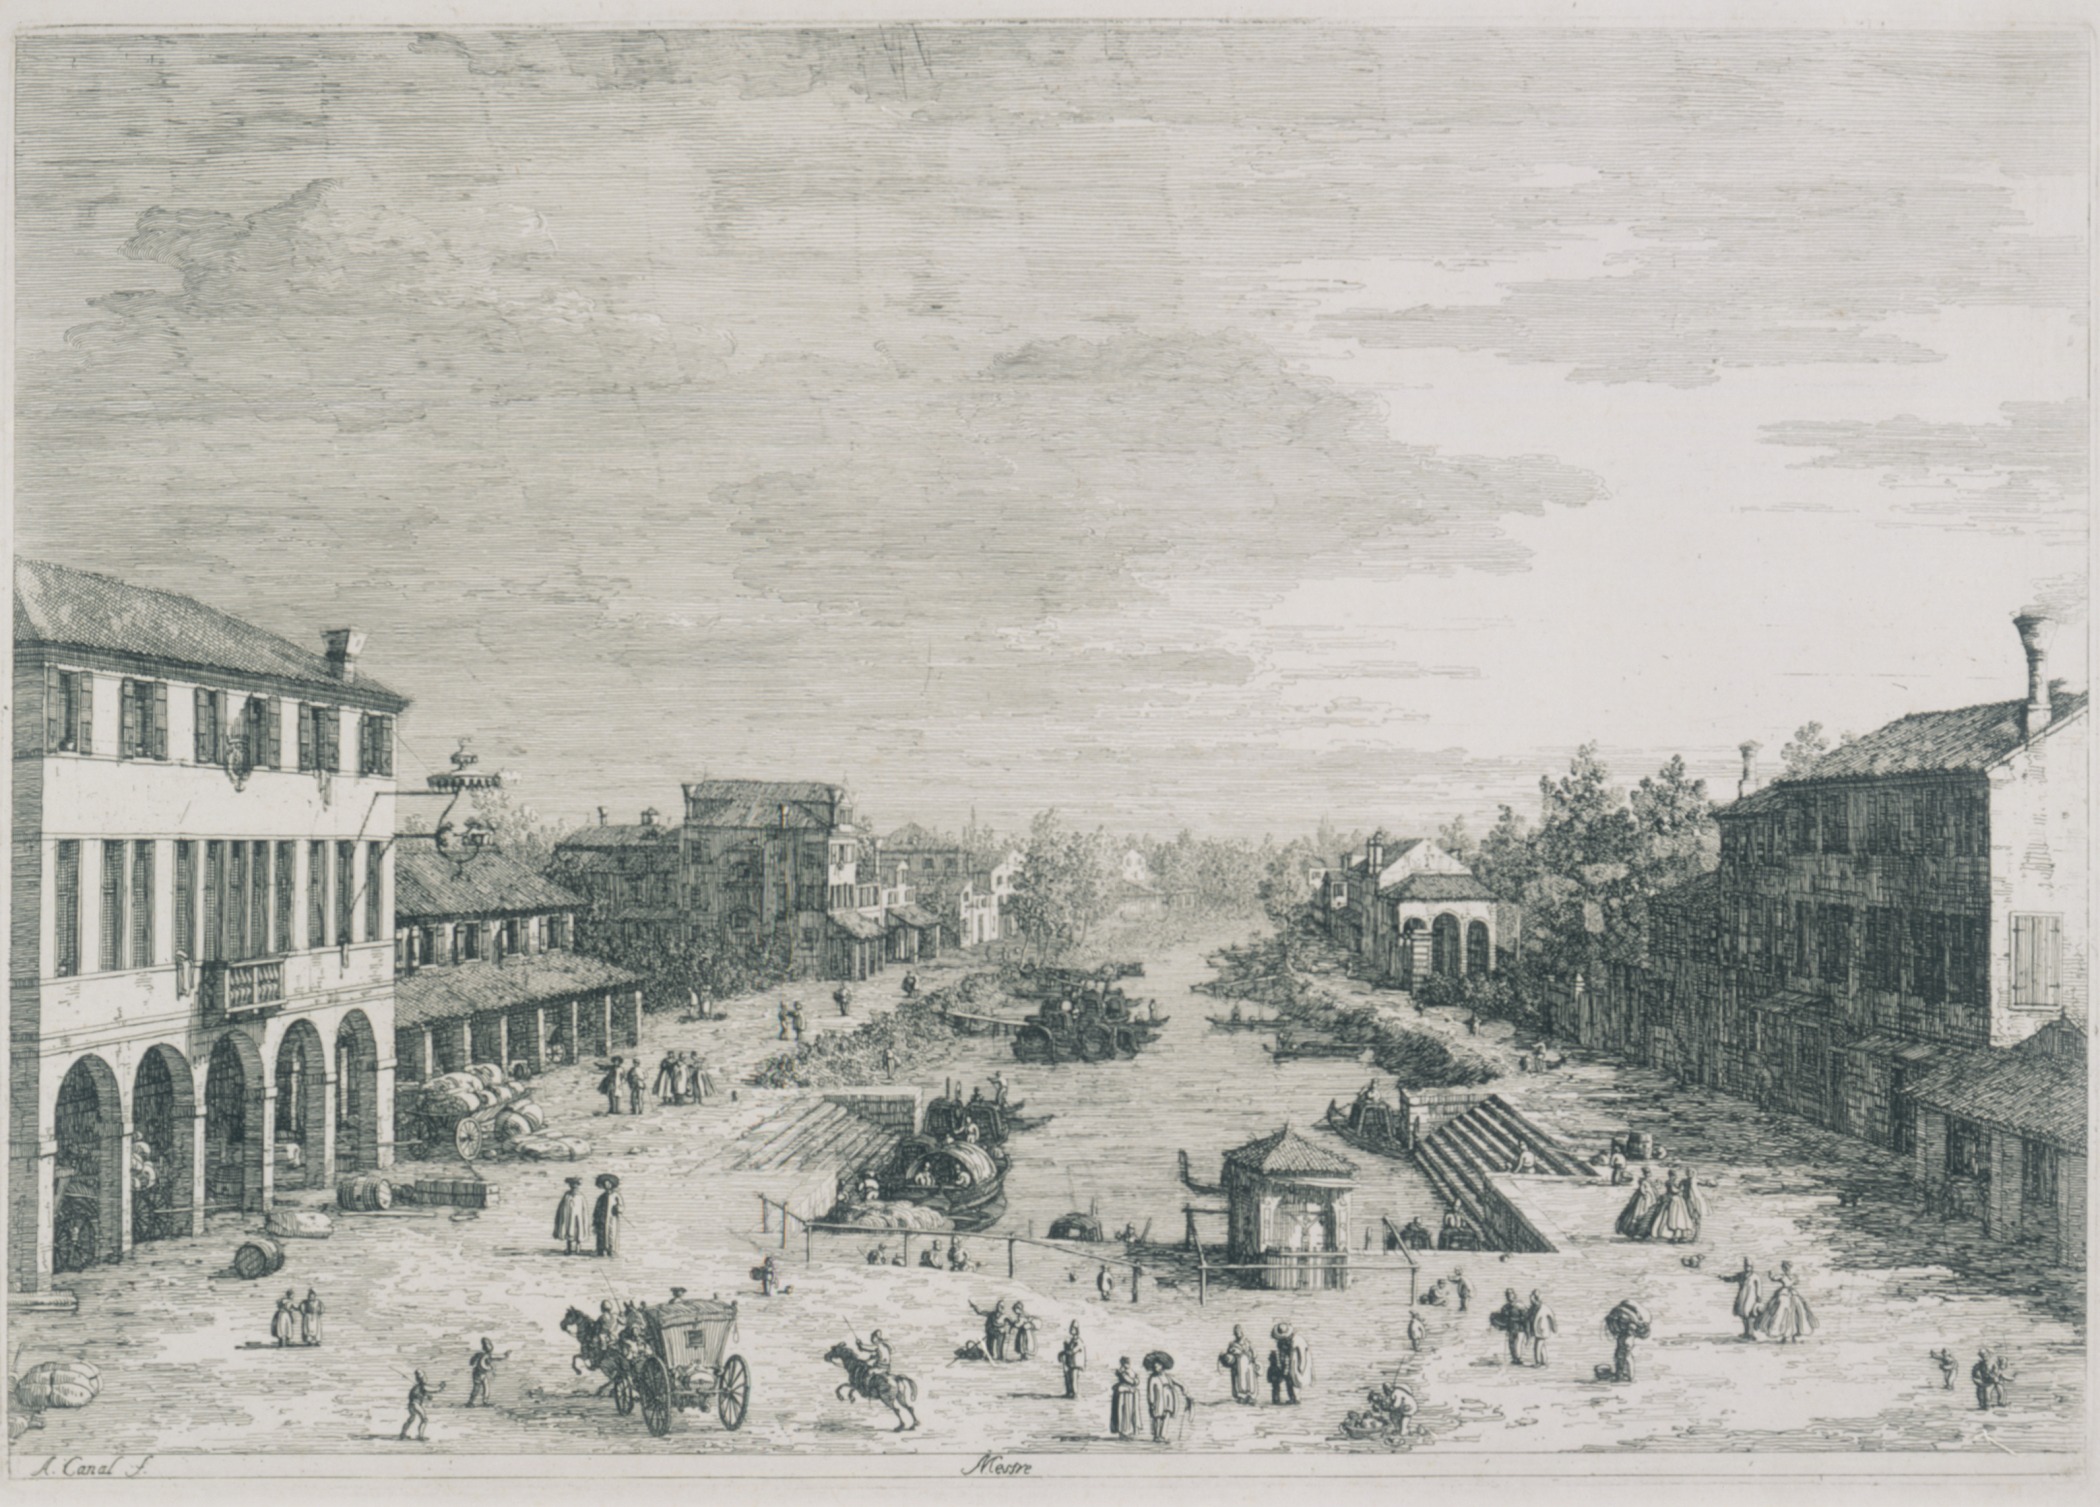 an old time black and white drawing shows the surrounding of a town